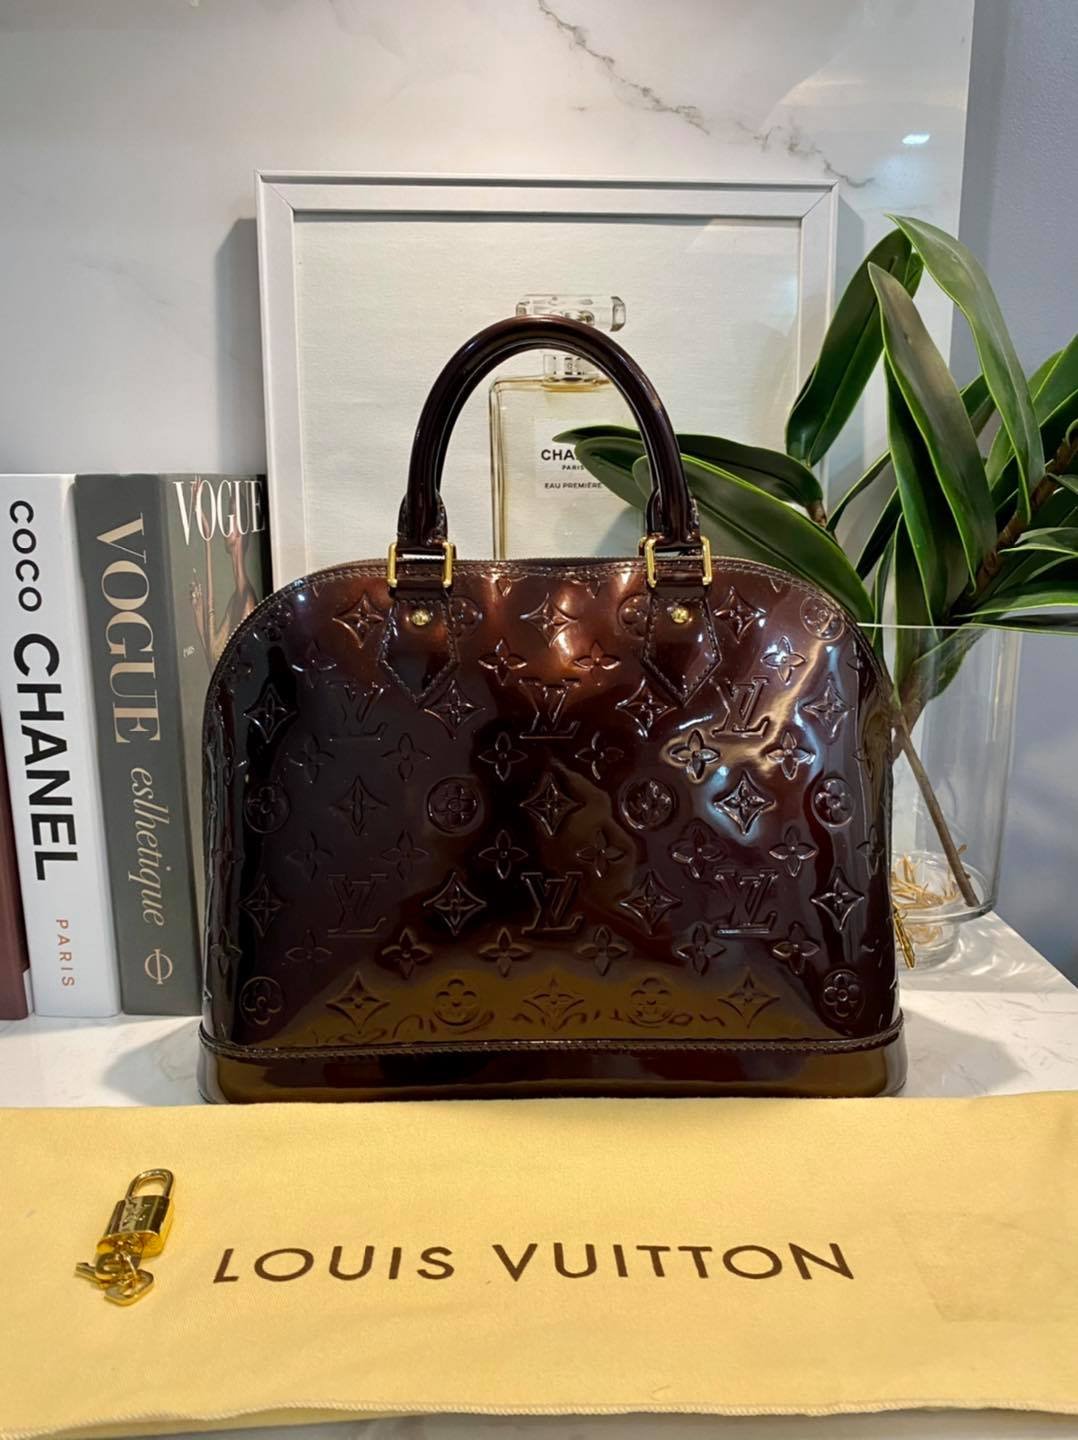 Buy Free Shipping Authentic Pre-owned Louis Vuitton Vernis Amarante Long  Beach MM Shoulder Tote Bag M90475 220011 from Japan - Buy authentic Plus  exclusive items from Japan